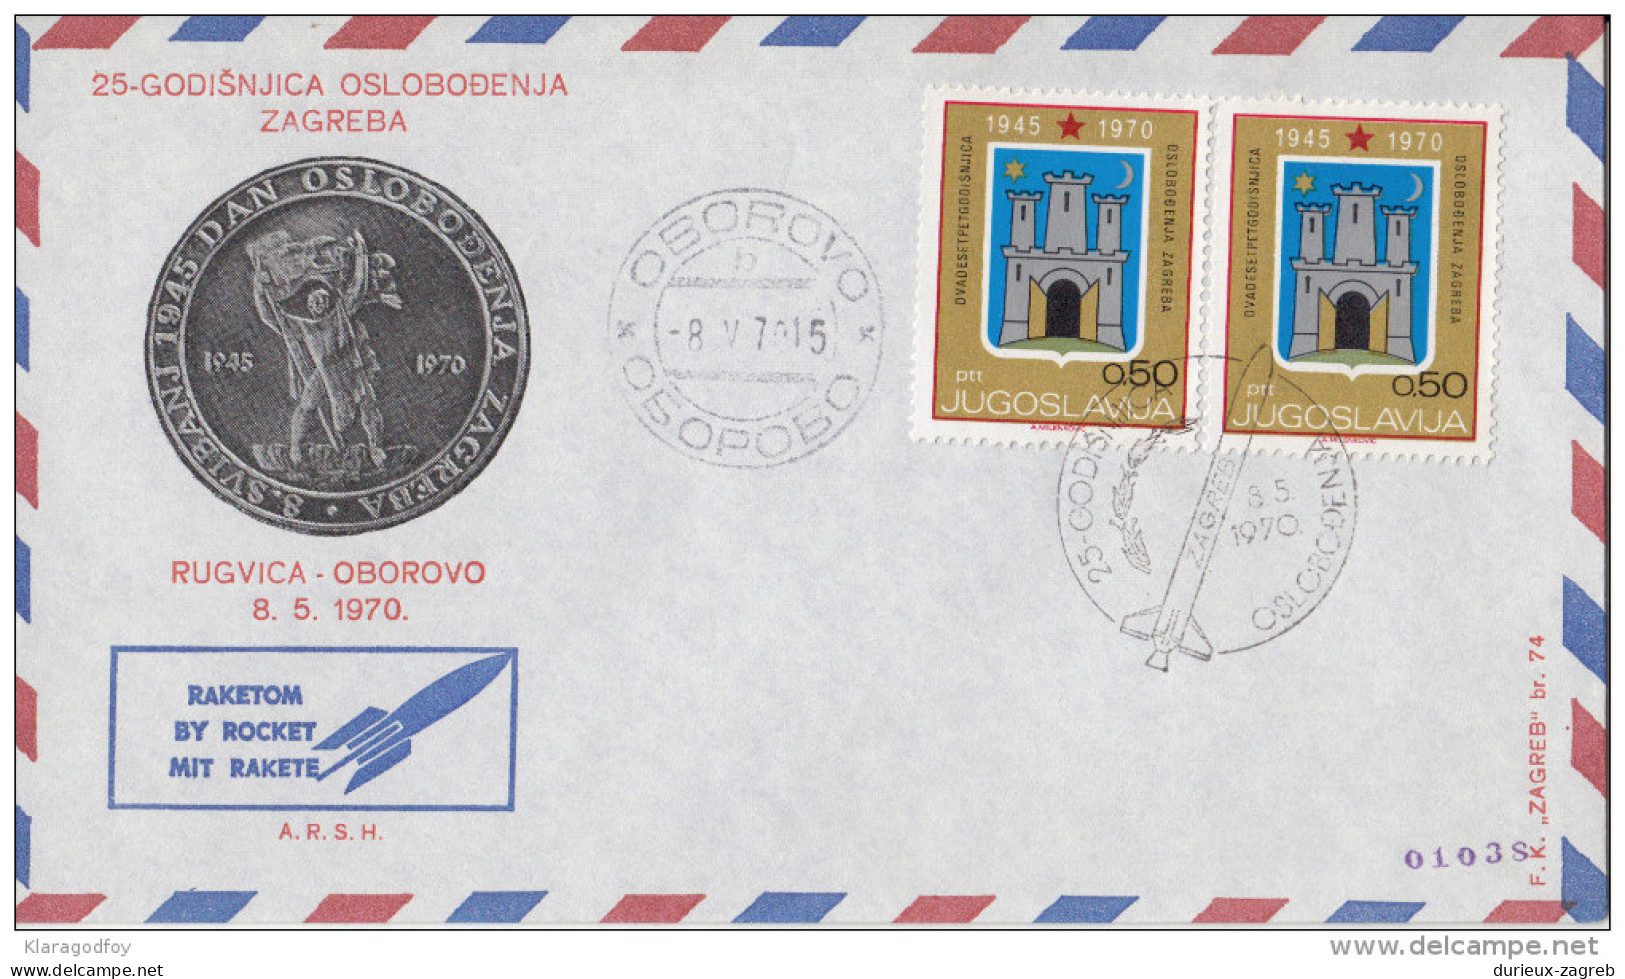 Rocket Post 25th Anniversary Of Zagreb Liberation Special Letter Cover & Postmark Bb161020 - Luftpost